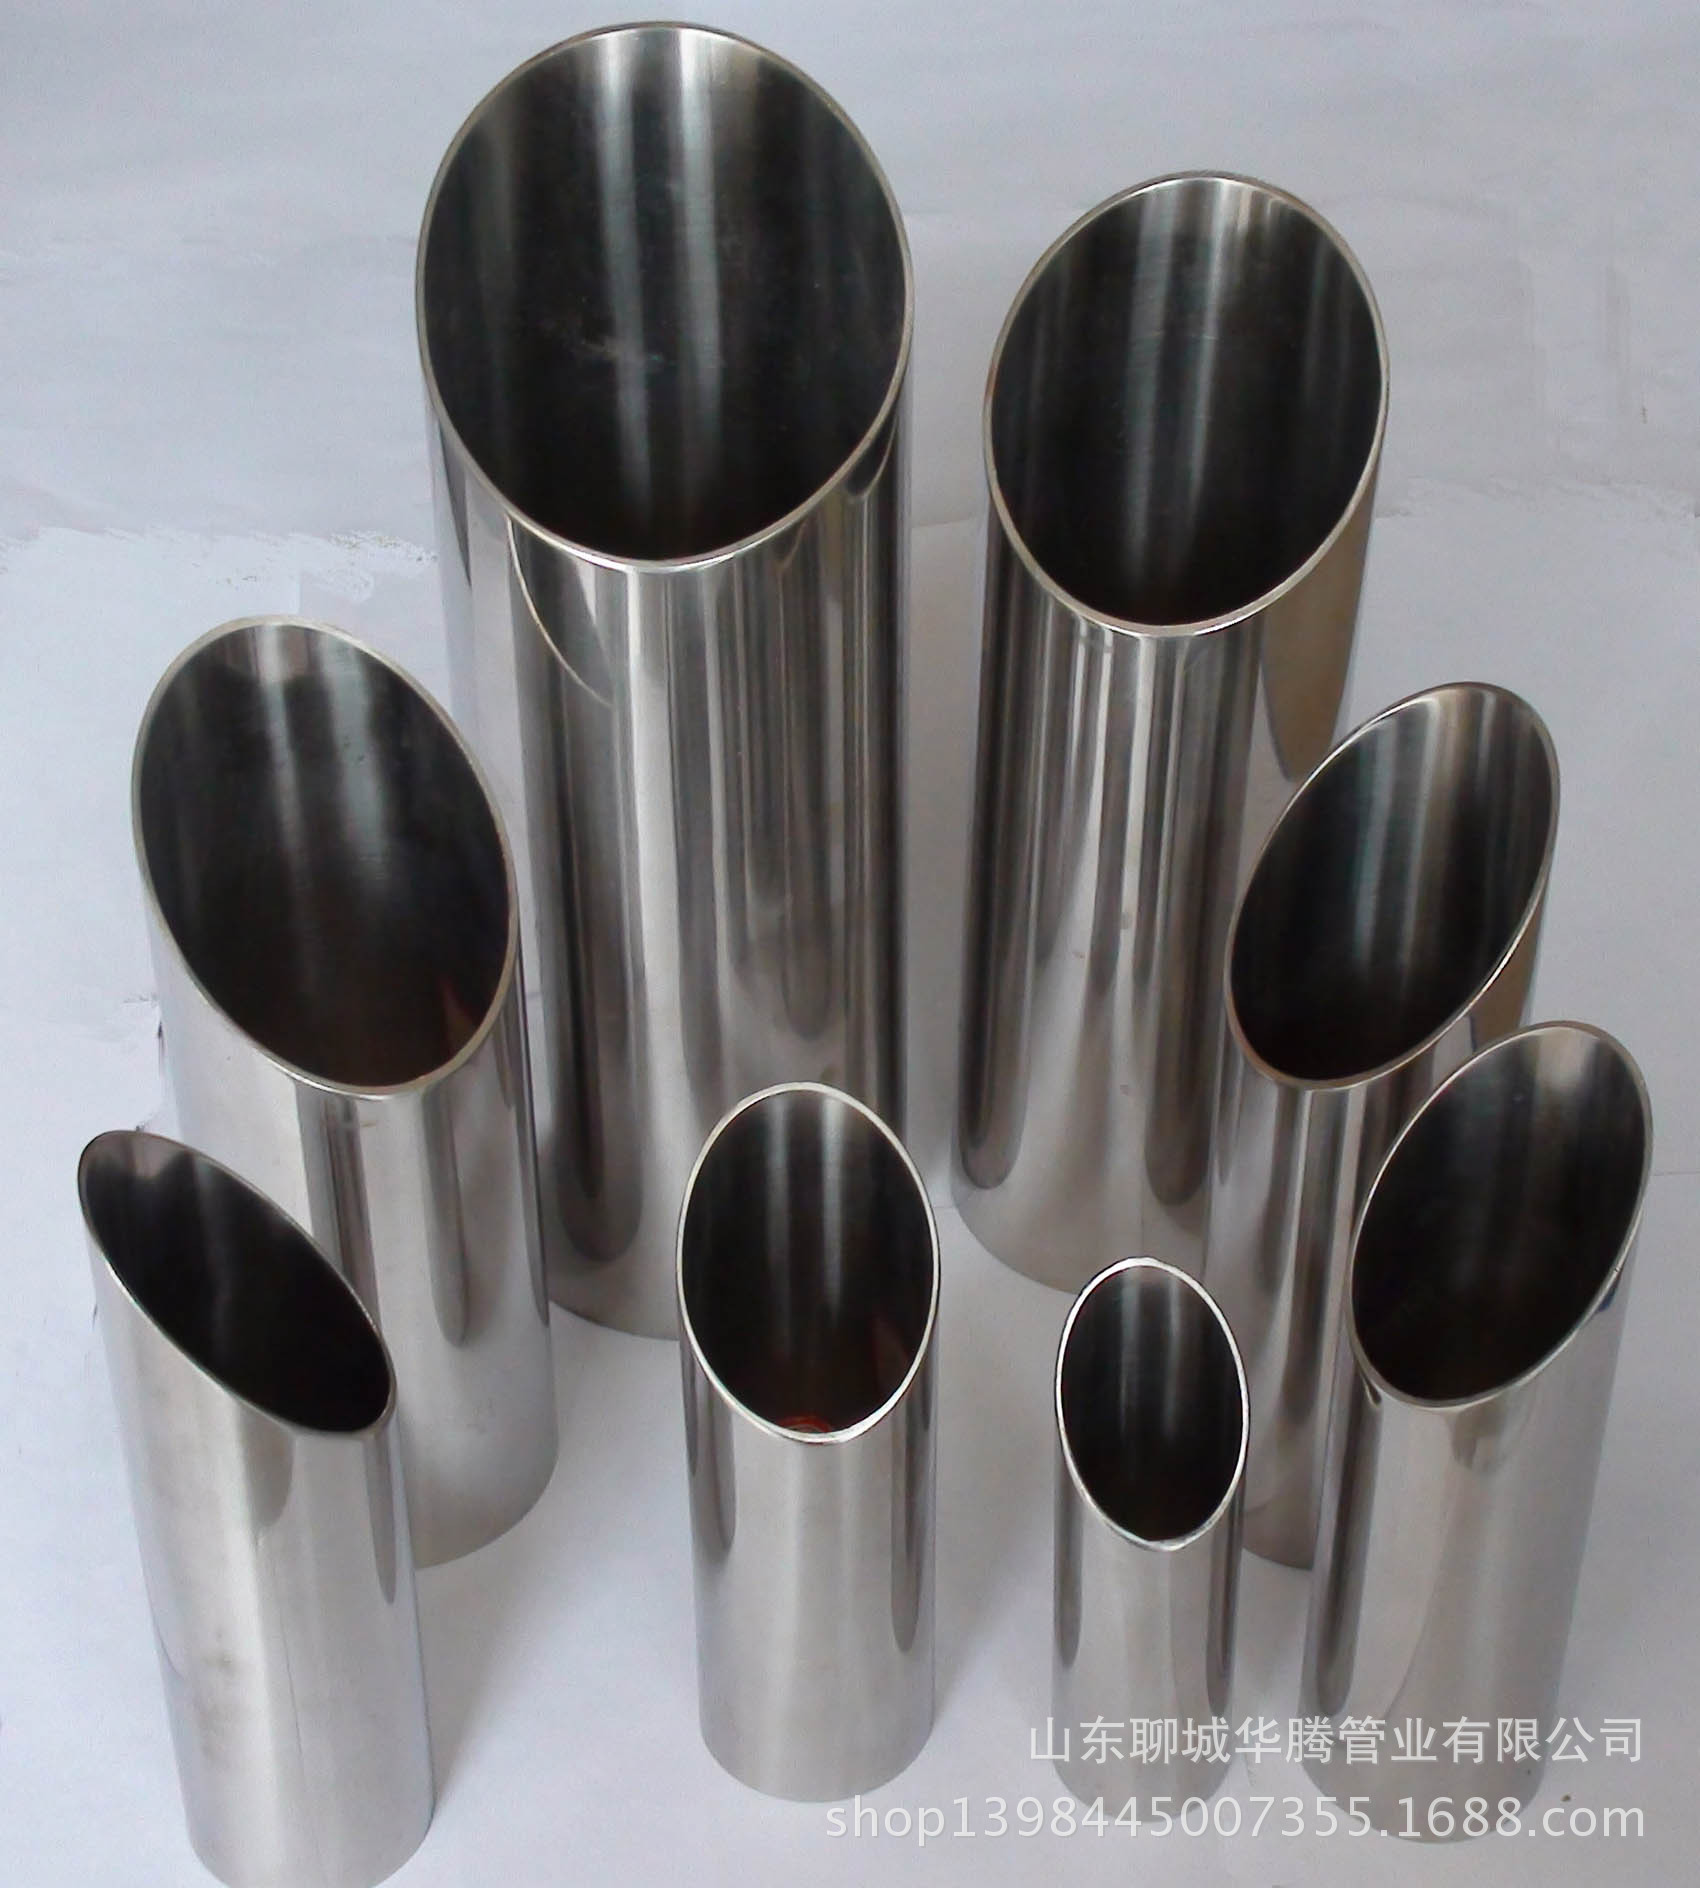 2010717173649stainless-steel-p